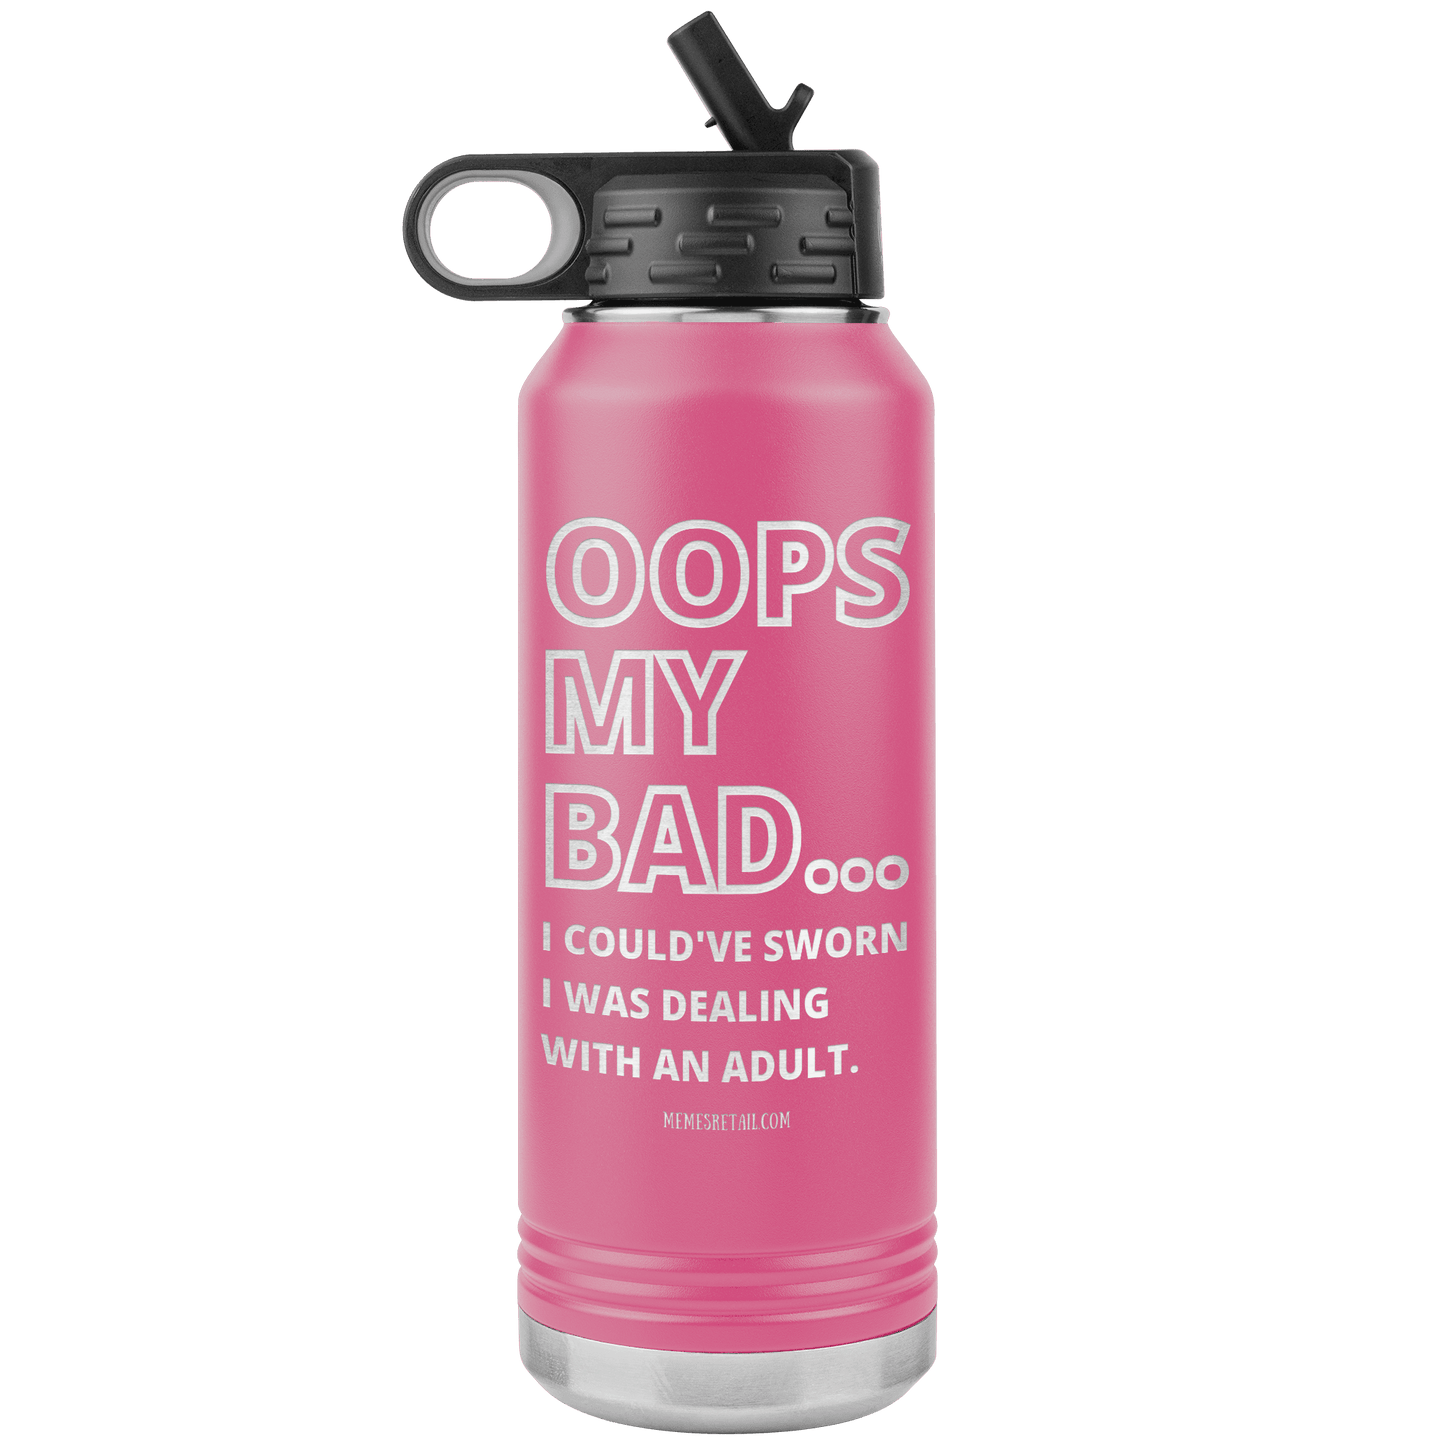 OOPS My bad...i could've sworn i was talking with an adult 32 oz Water Tumbler, Pink - MemesRetail.com